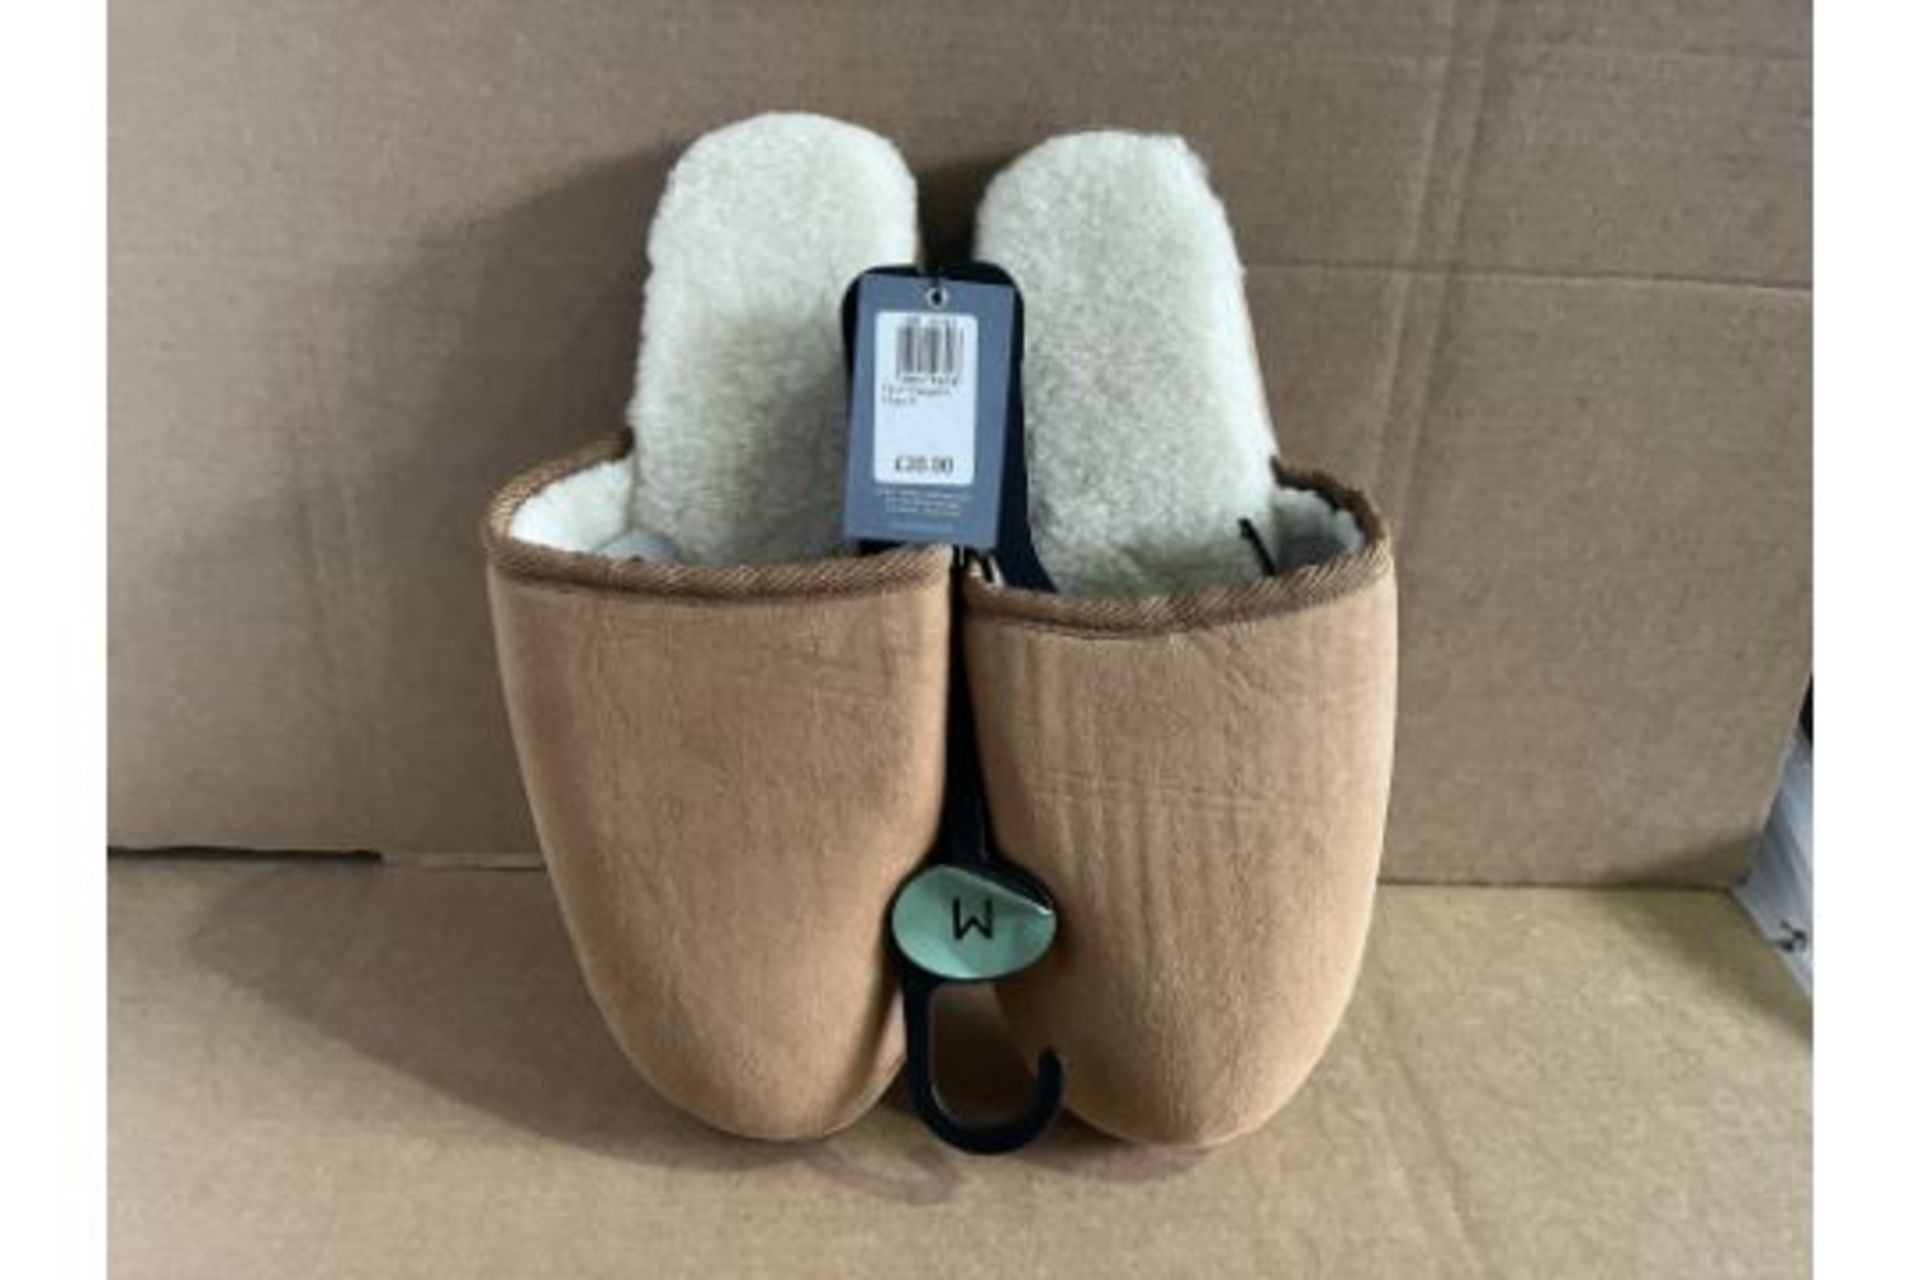 12 X BRAND NEW CHESTNUT FAUX SHEEPSMULE SLIPPERS SIZE MEDIUM PRICE MARKED £20 EACH R19